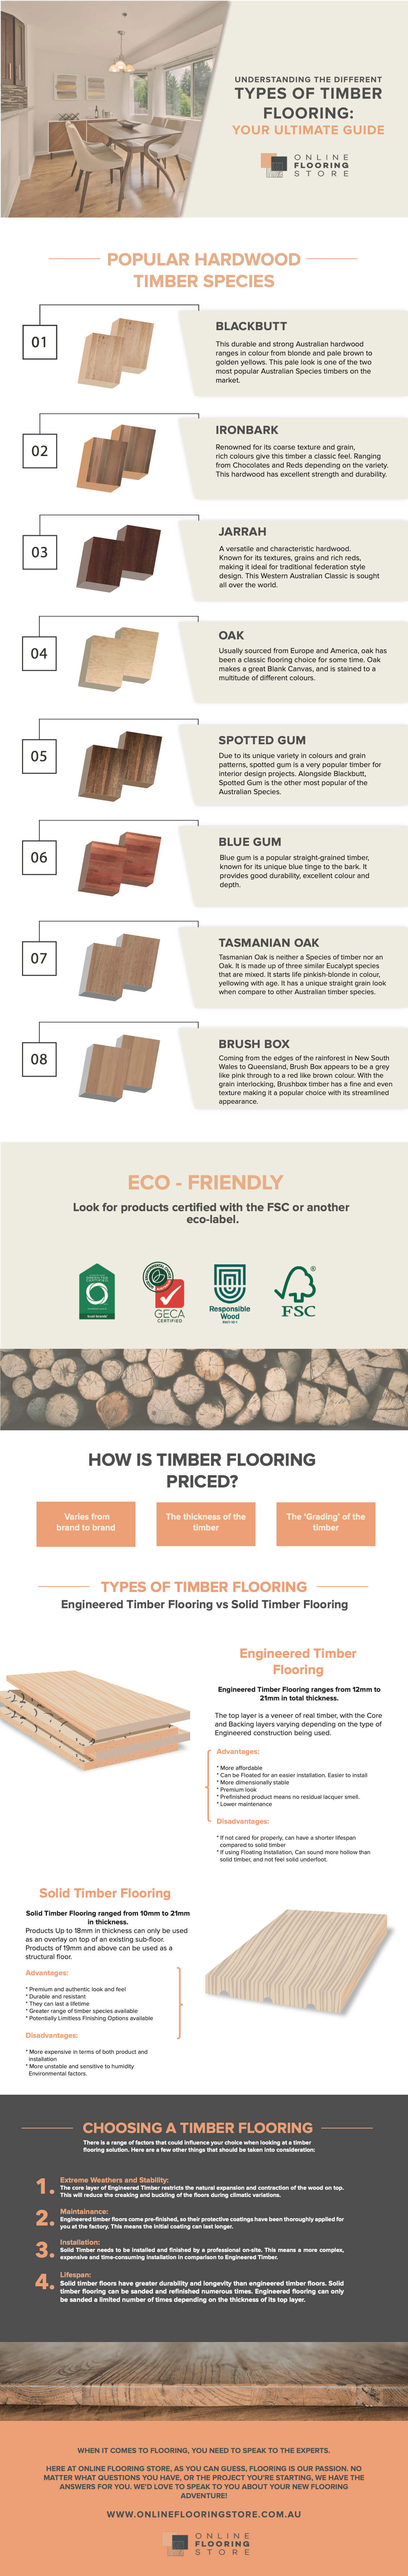 The different types of timber flooring